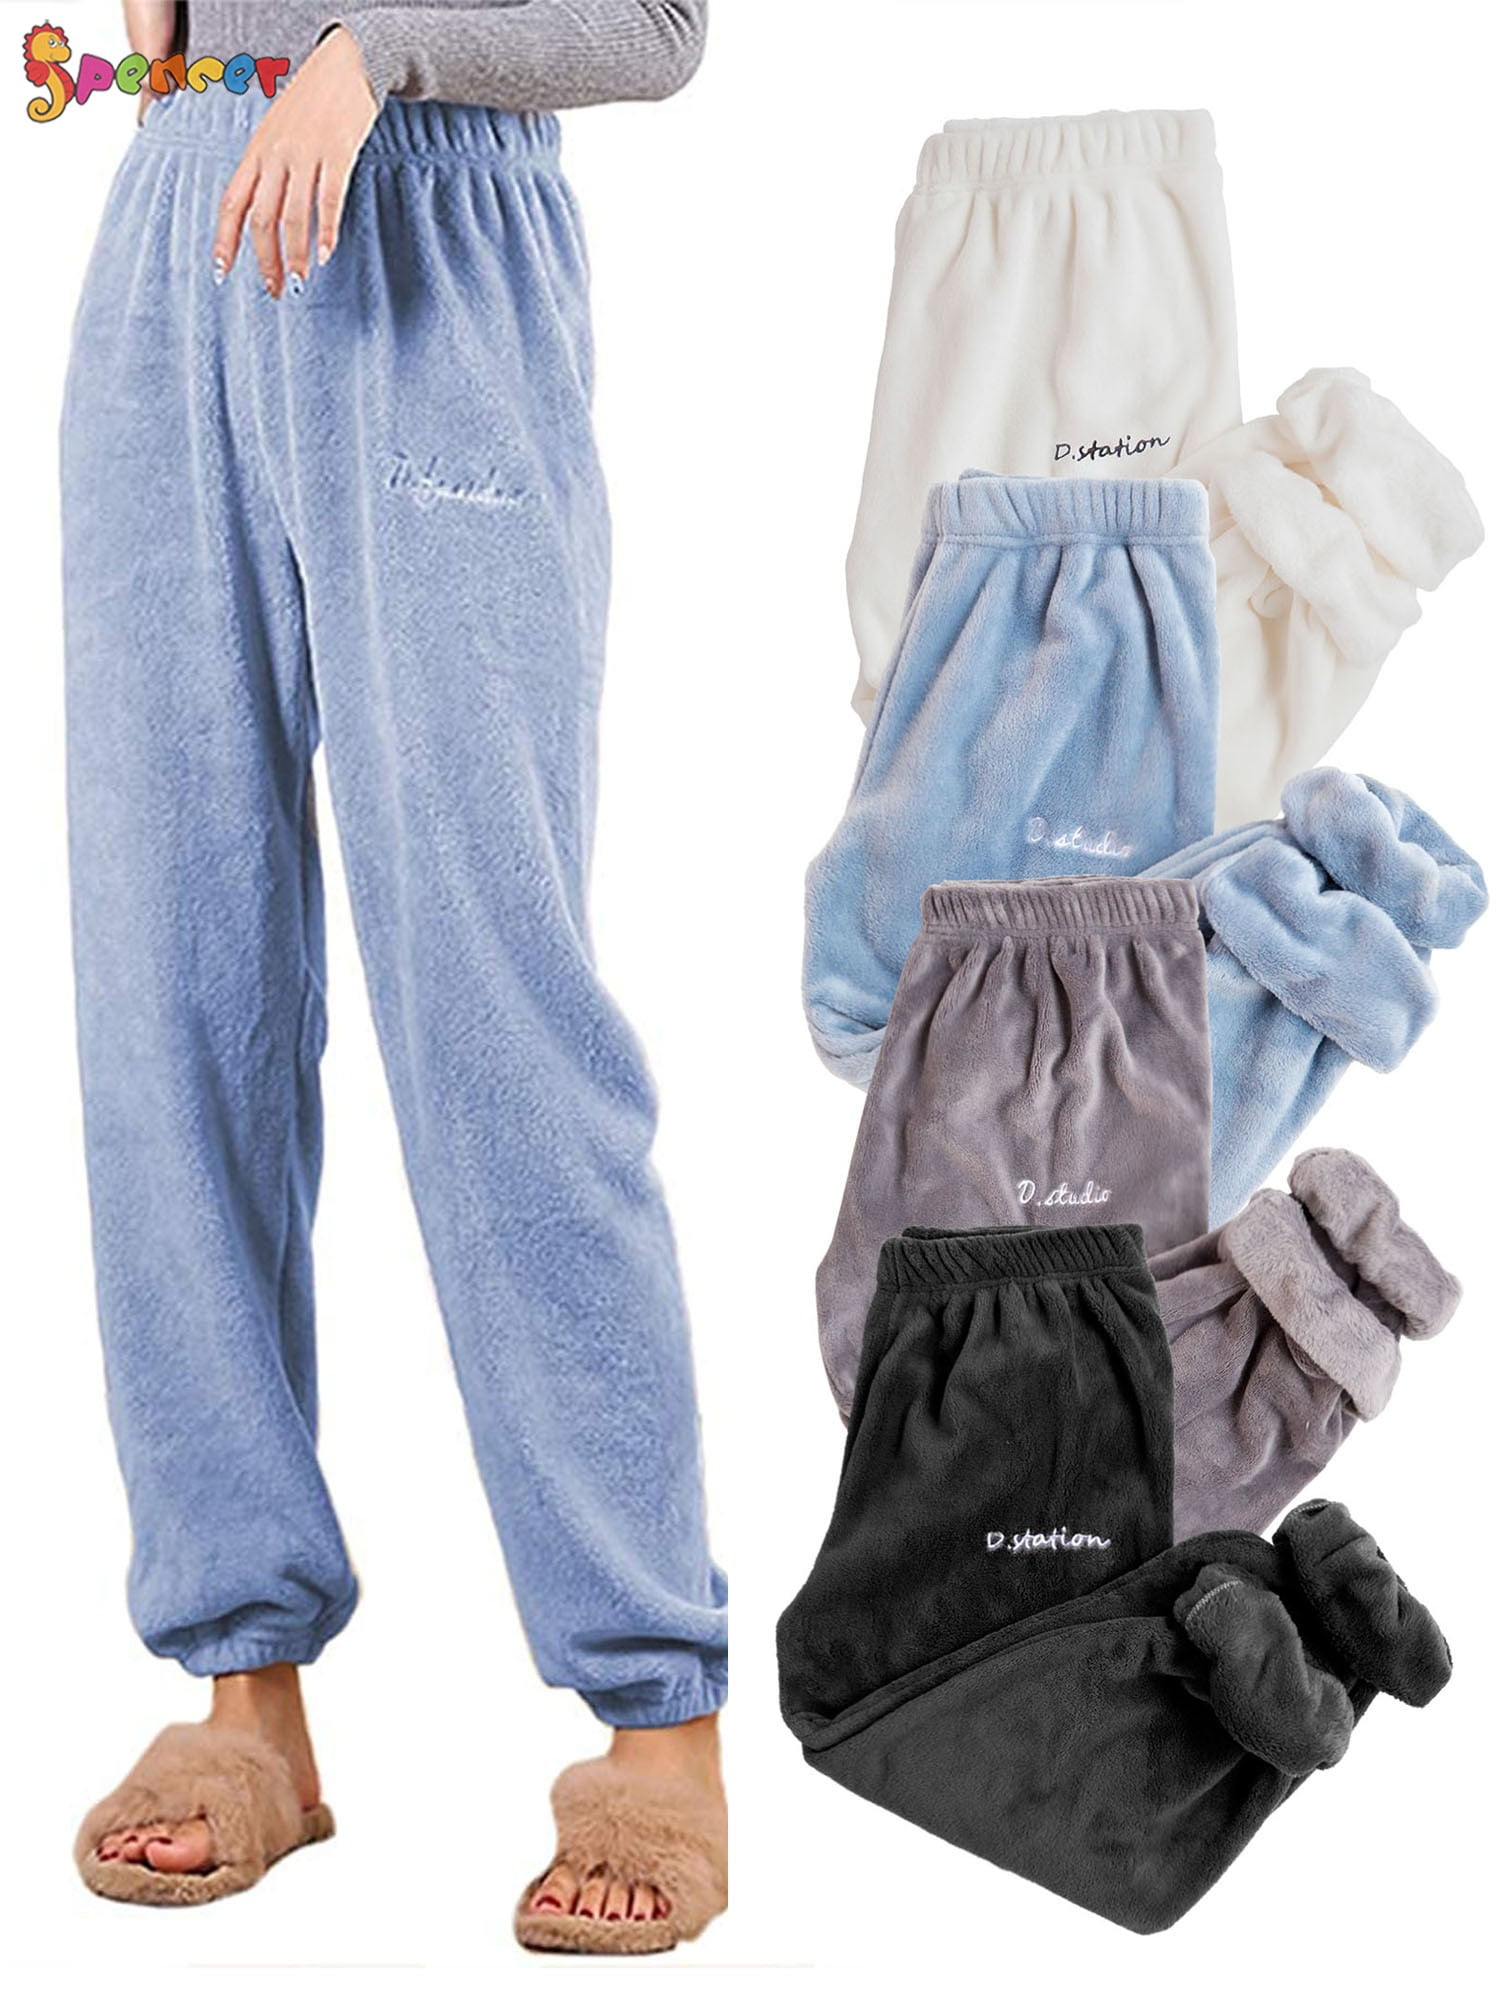 Famulily Womens Winter Thick Plush Fluffy Warm Soft Fleece Lounge Pj Pants Bottoms with Pockets